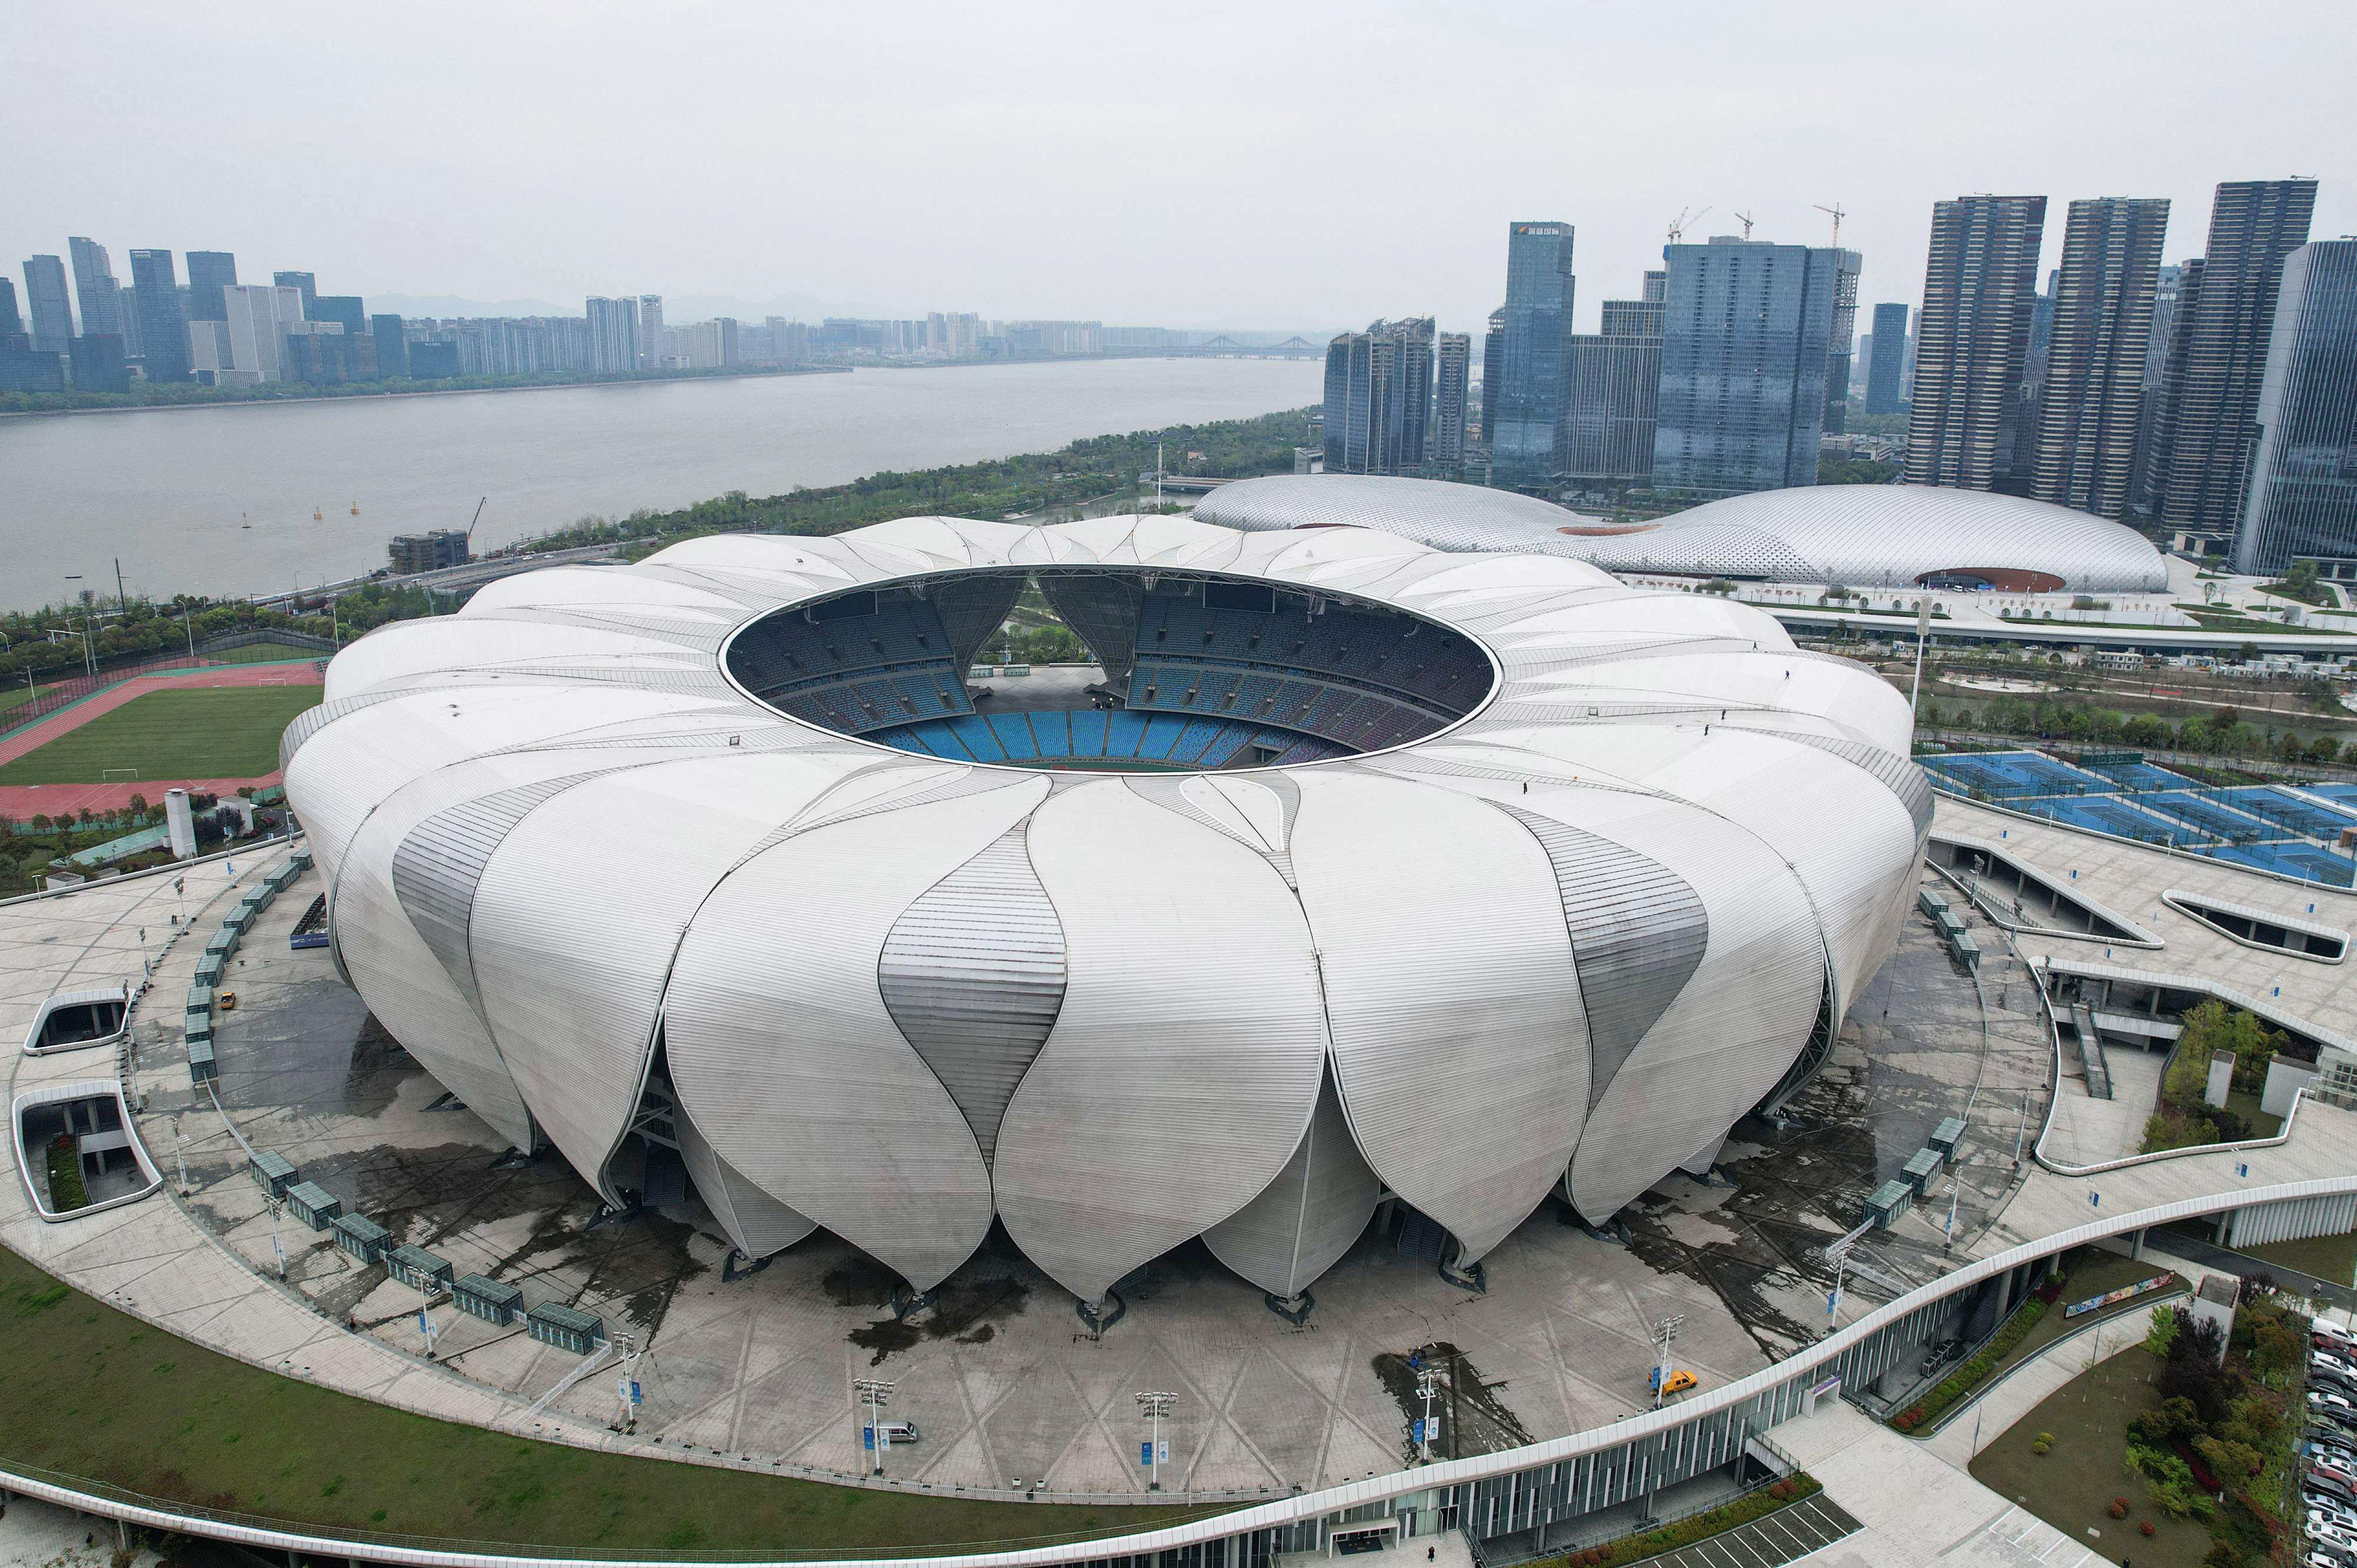 The Hangzhou Olympic Sports Centre Stadium will play host to the 19th Asian Games in September. Photo: AFP